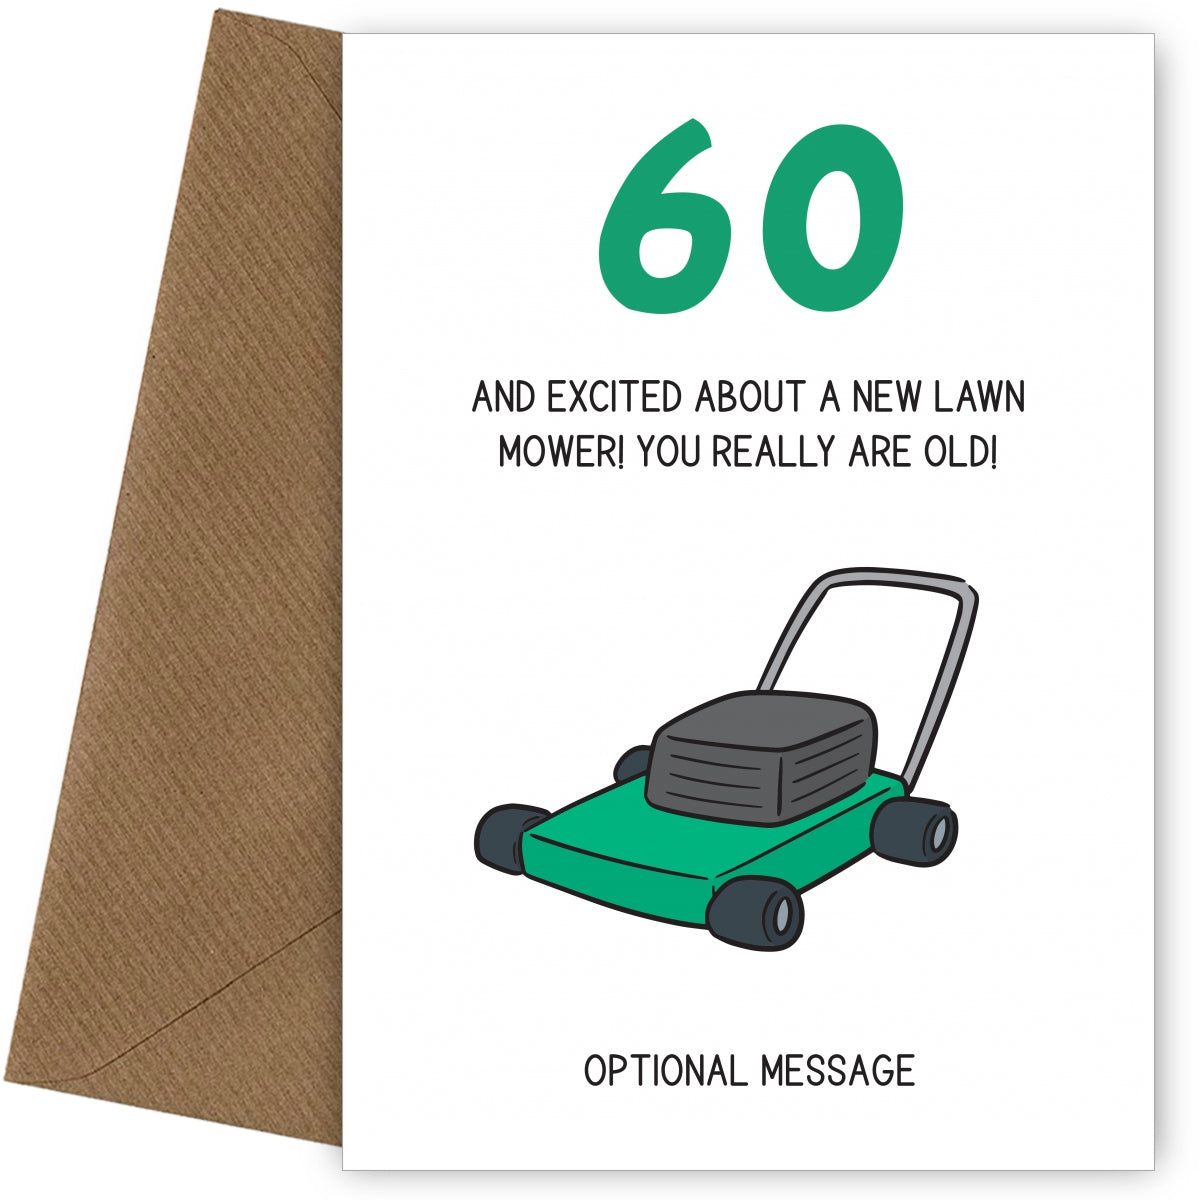 Happy 60th Birthday Card - Excited About Lawn Mower!